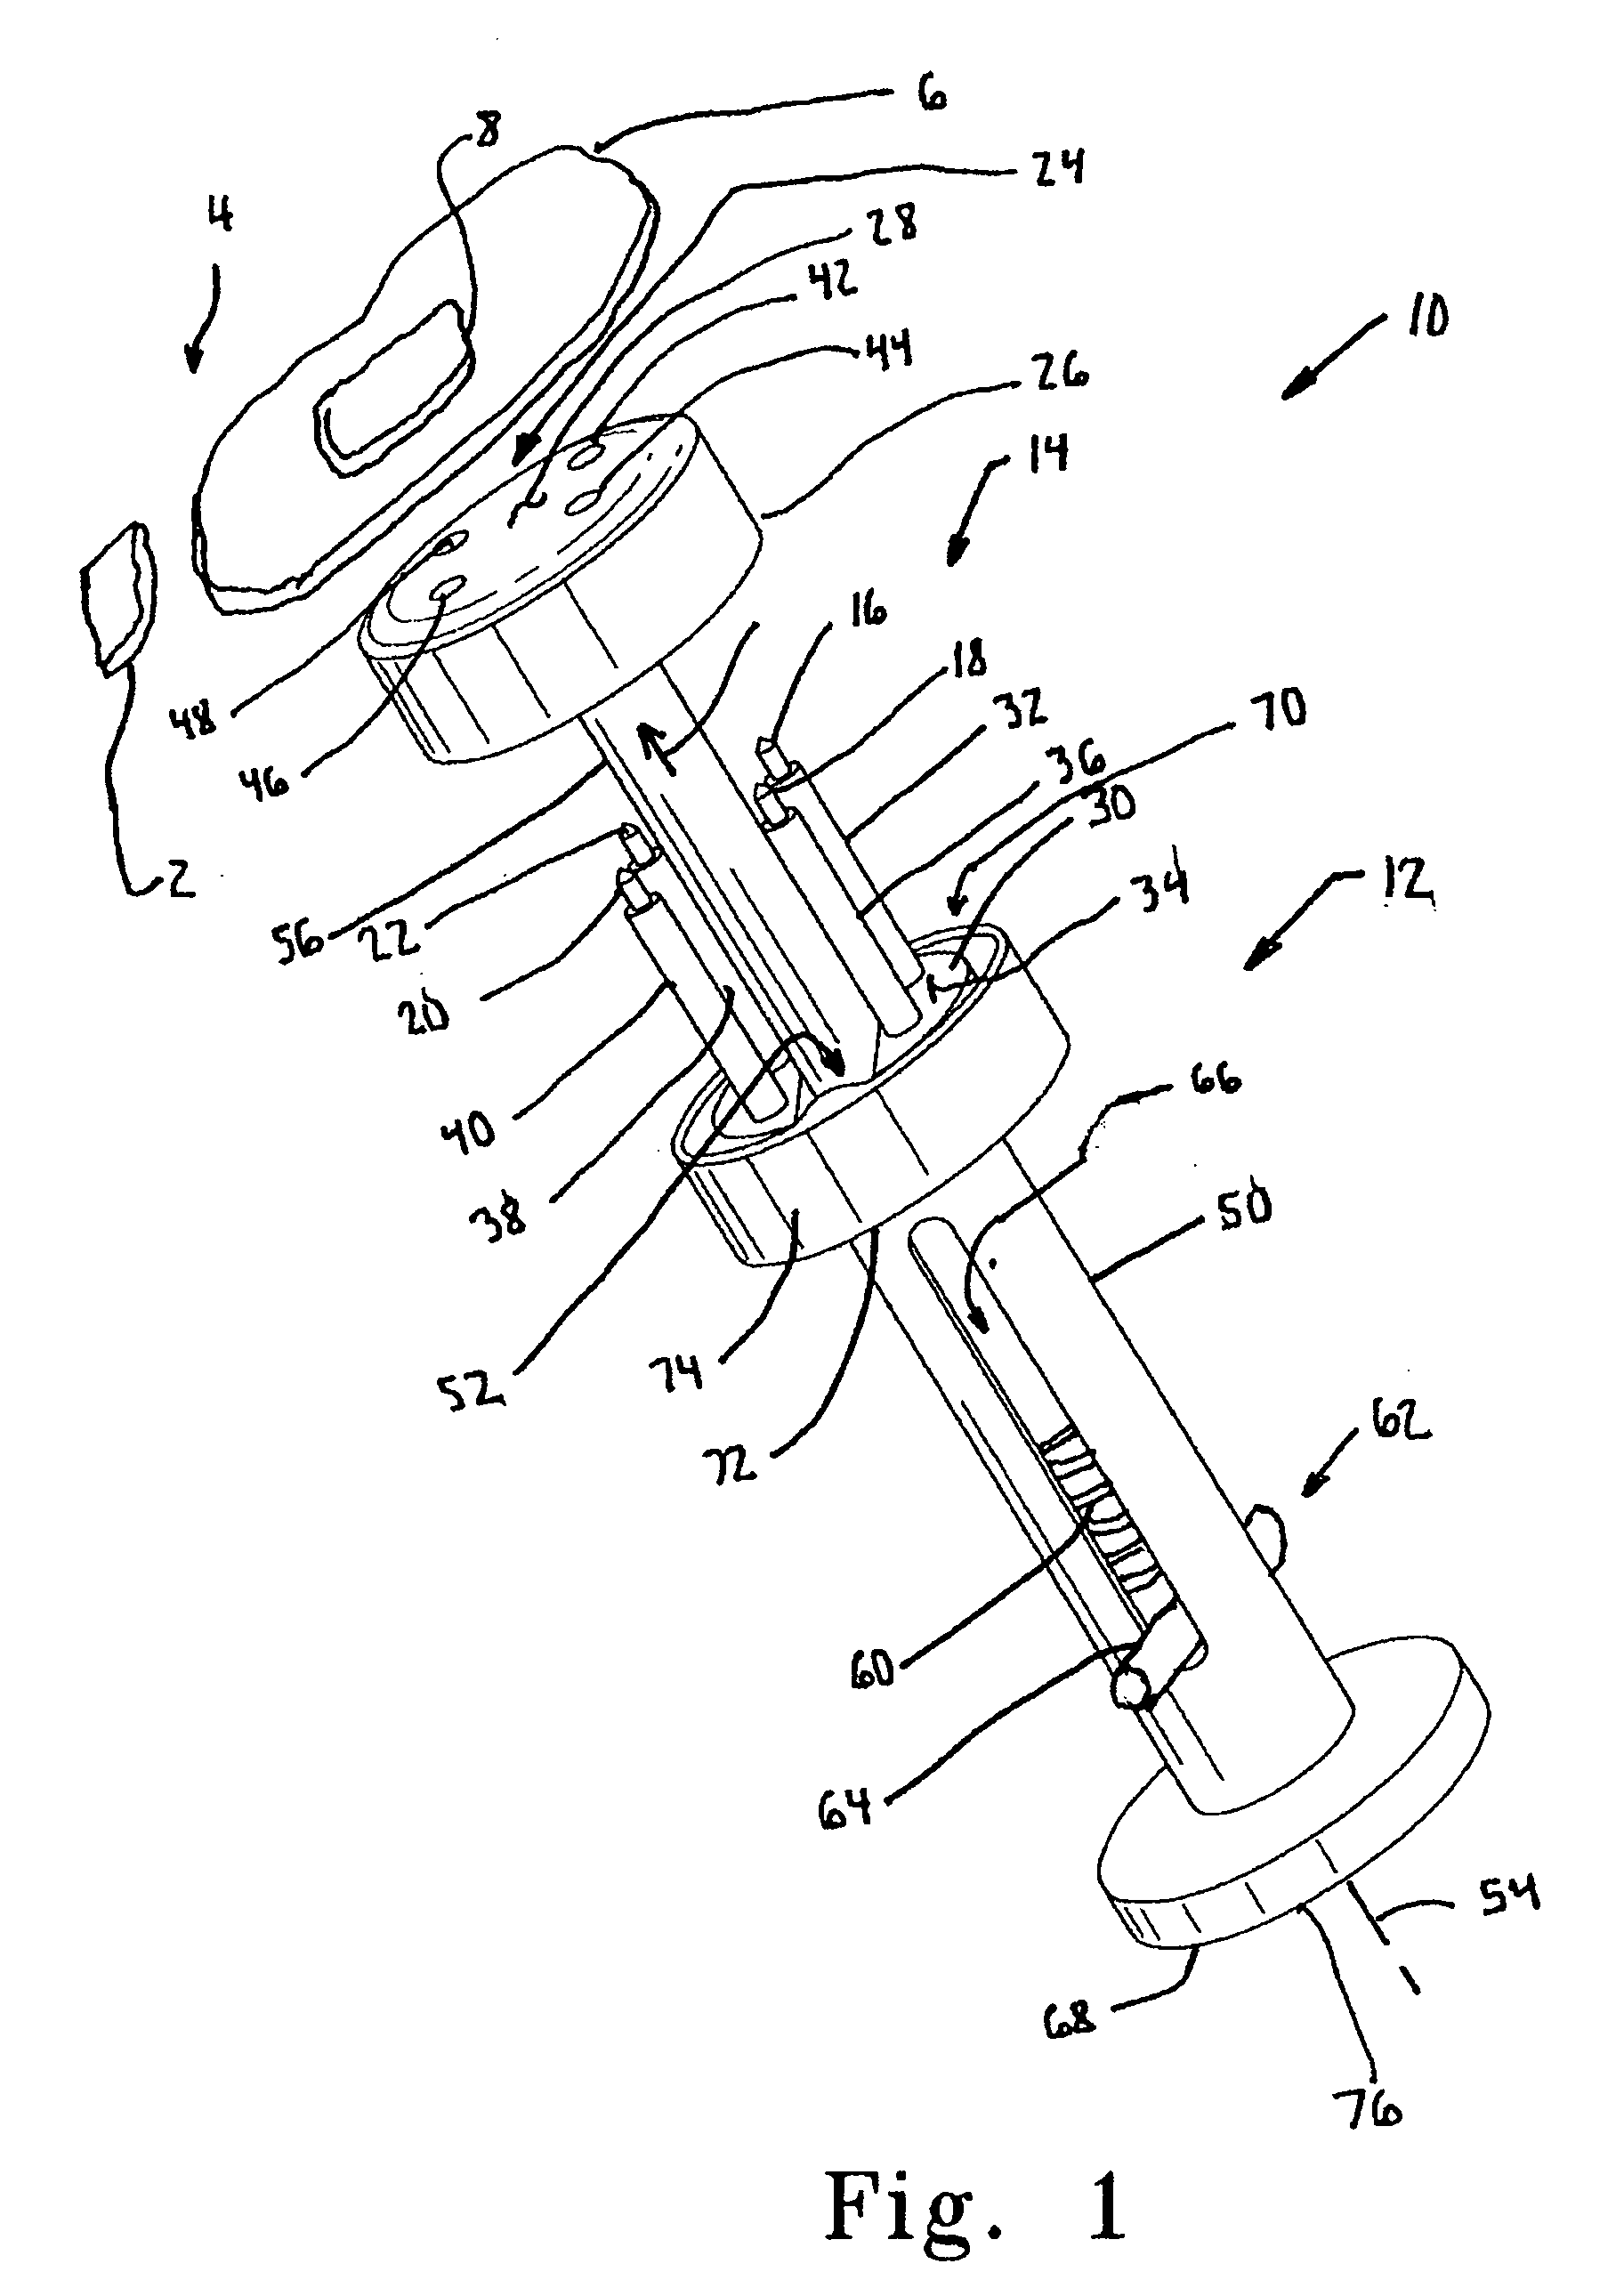 Suture anchor cartridge holder, suture anchor cartridge and associated method